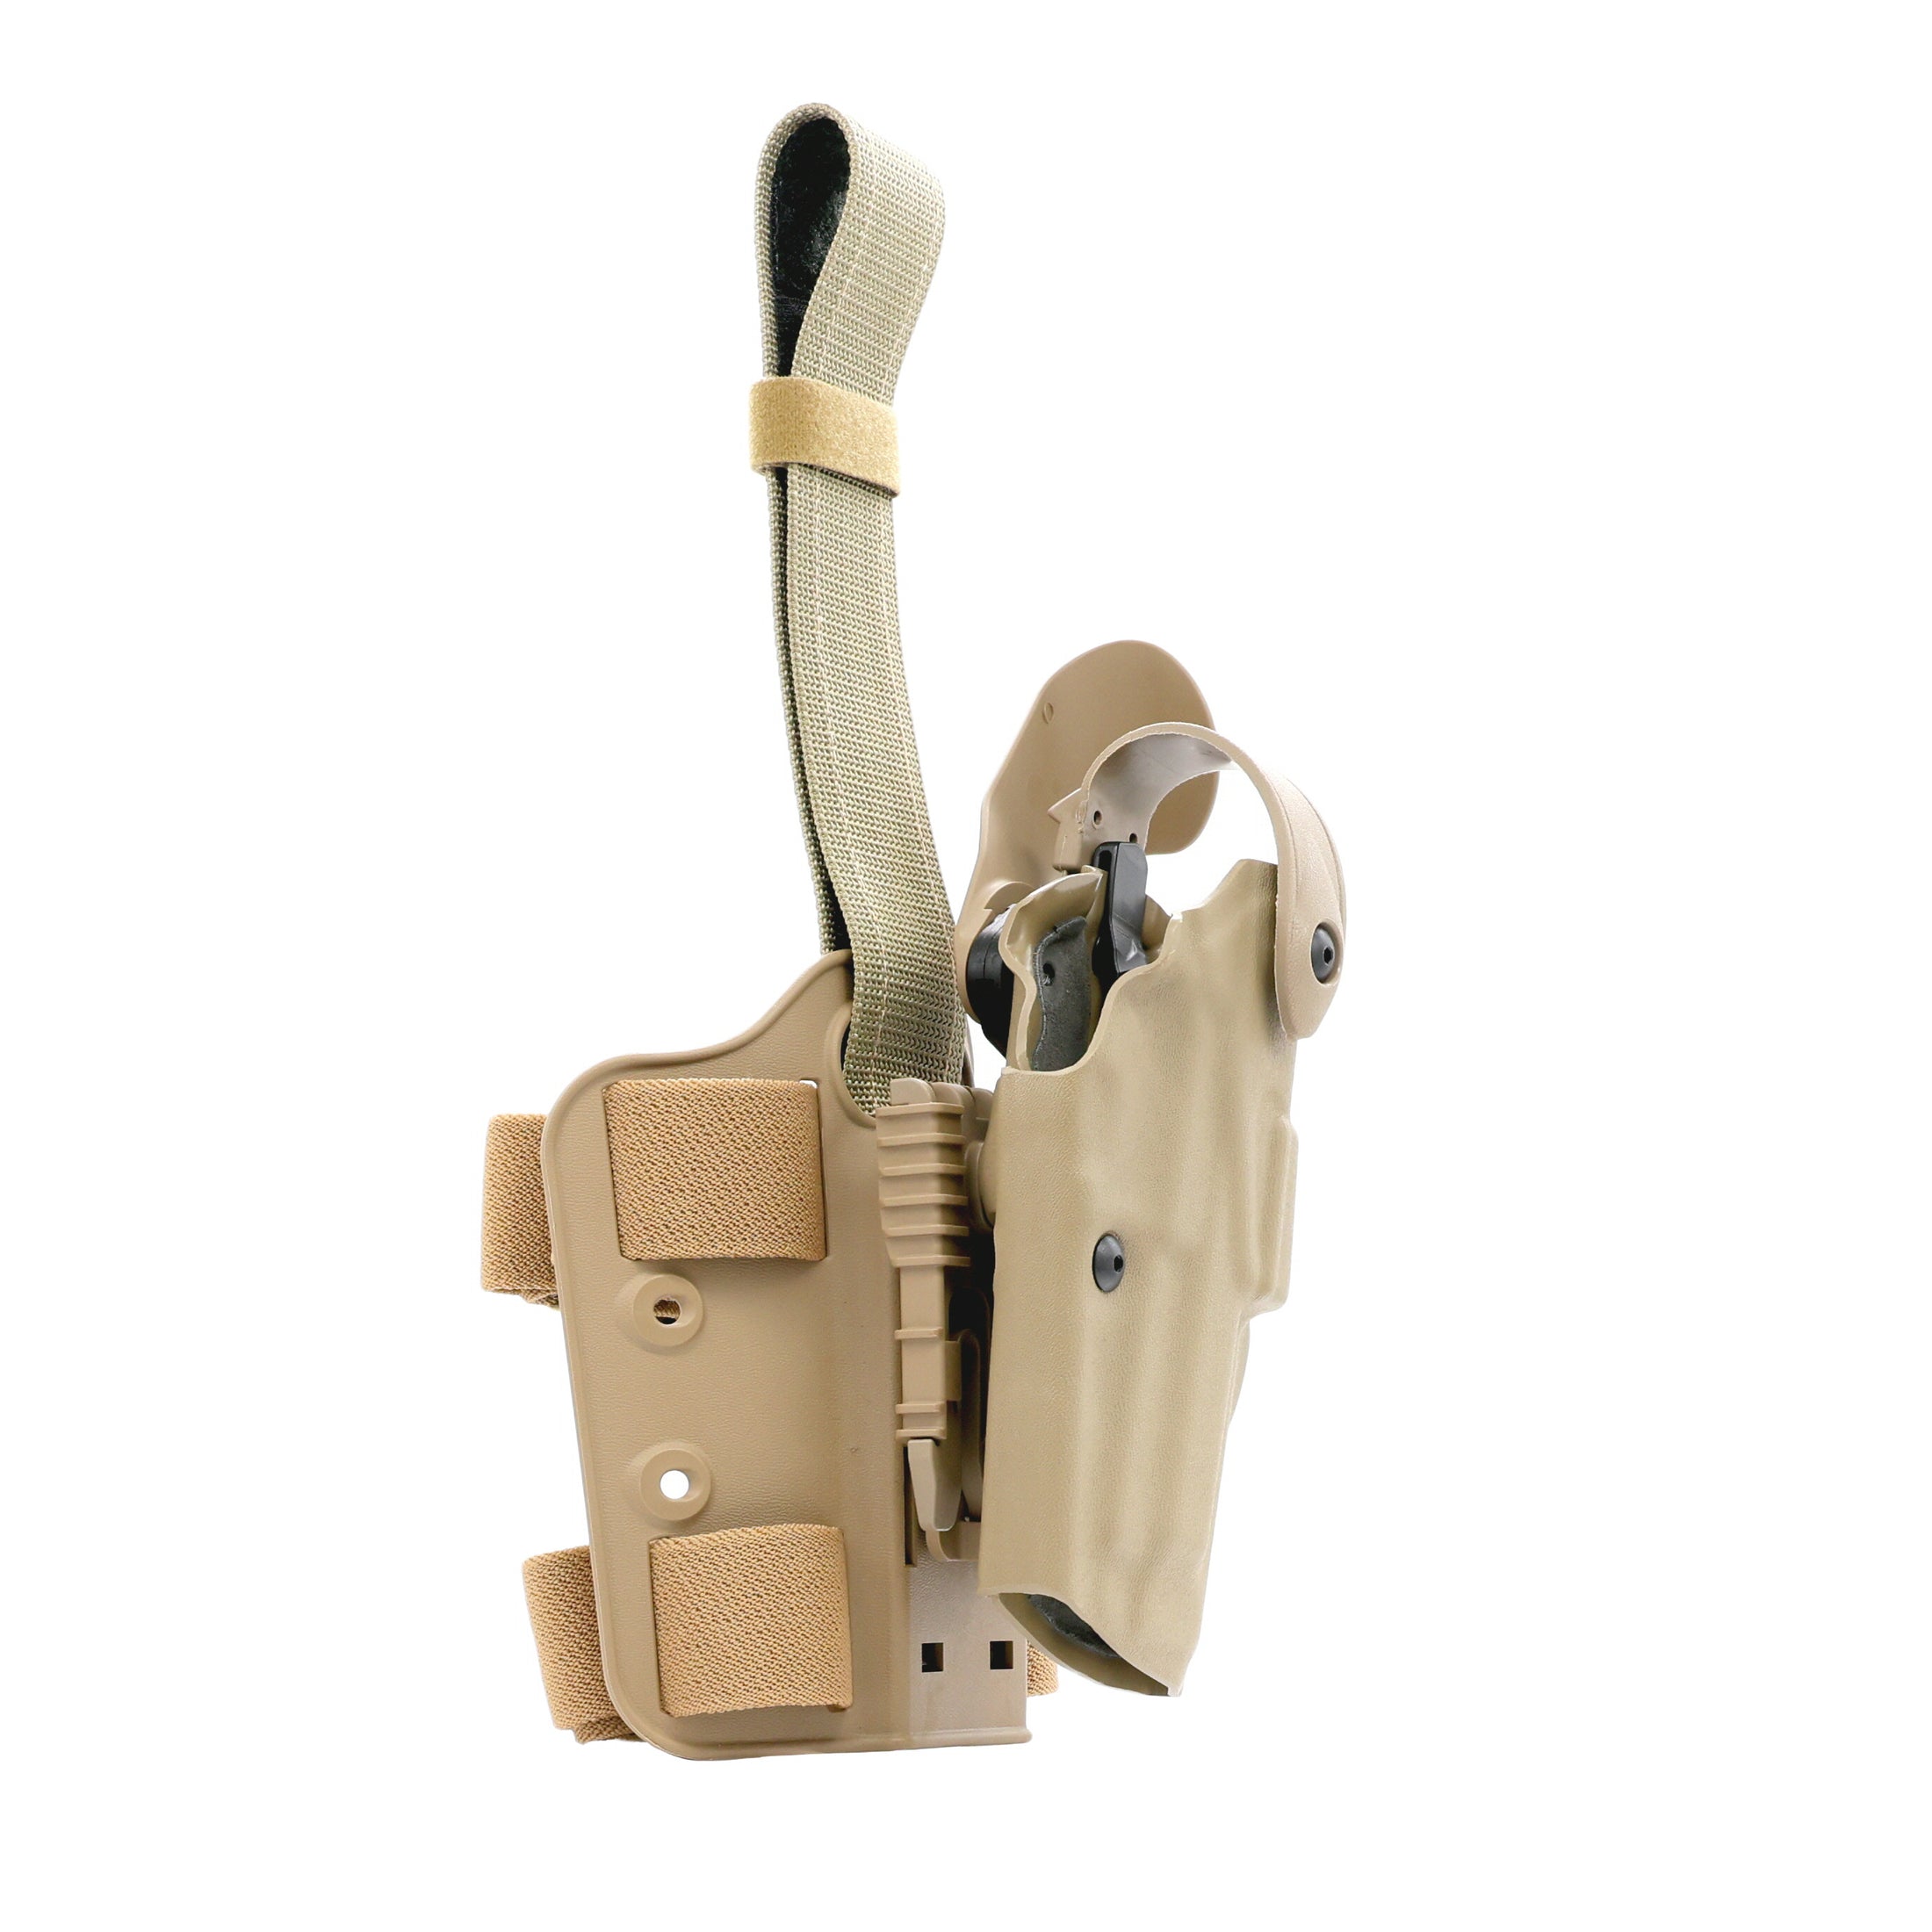 Safariland Model 6354 ALS Drop-Leg Glock Holster  Up to 20% Off 4.7 Star  Rating w/ Free Shipping and Handling